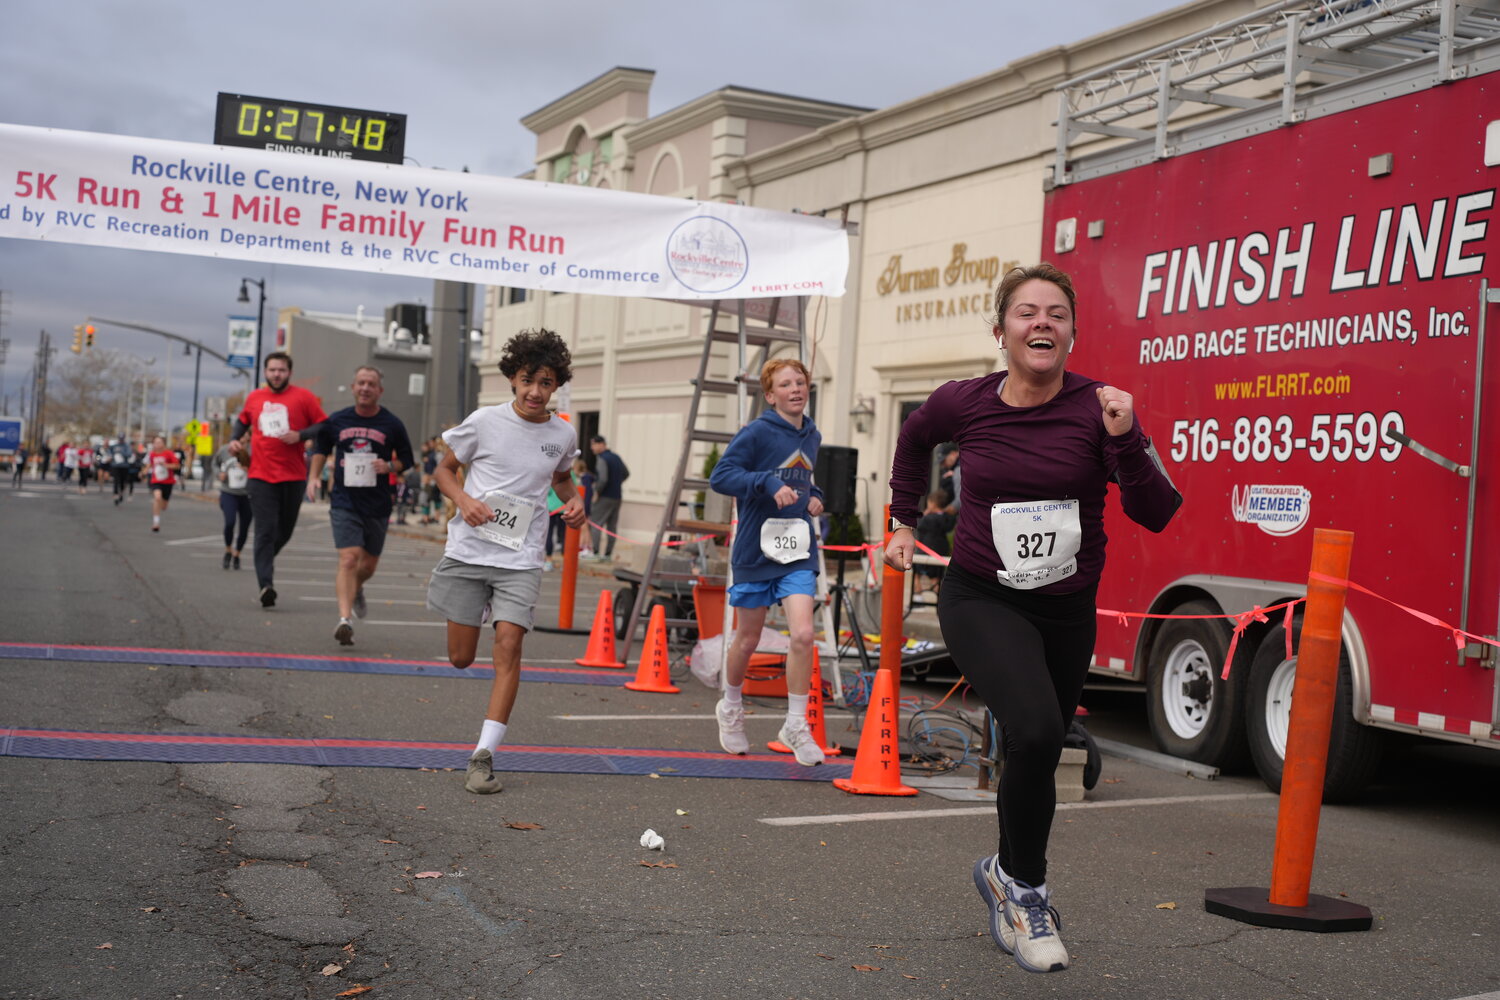 Kristin Rudolph, 42, of Rockville Centre breezes through the finish line with a time of 27 minutes, 46 seconds.